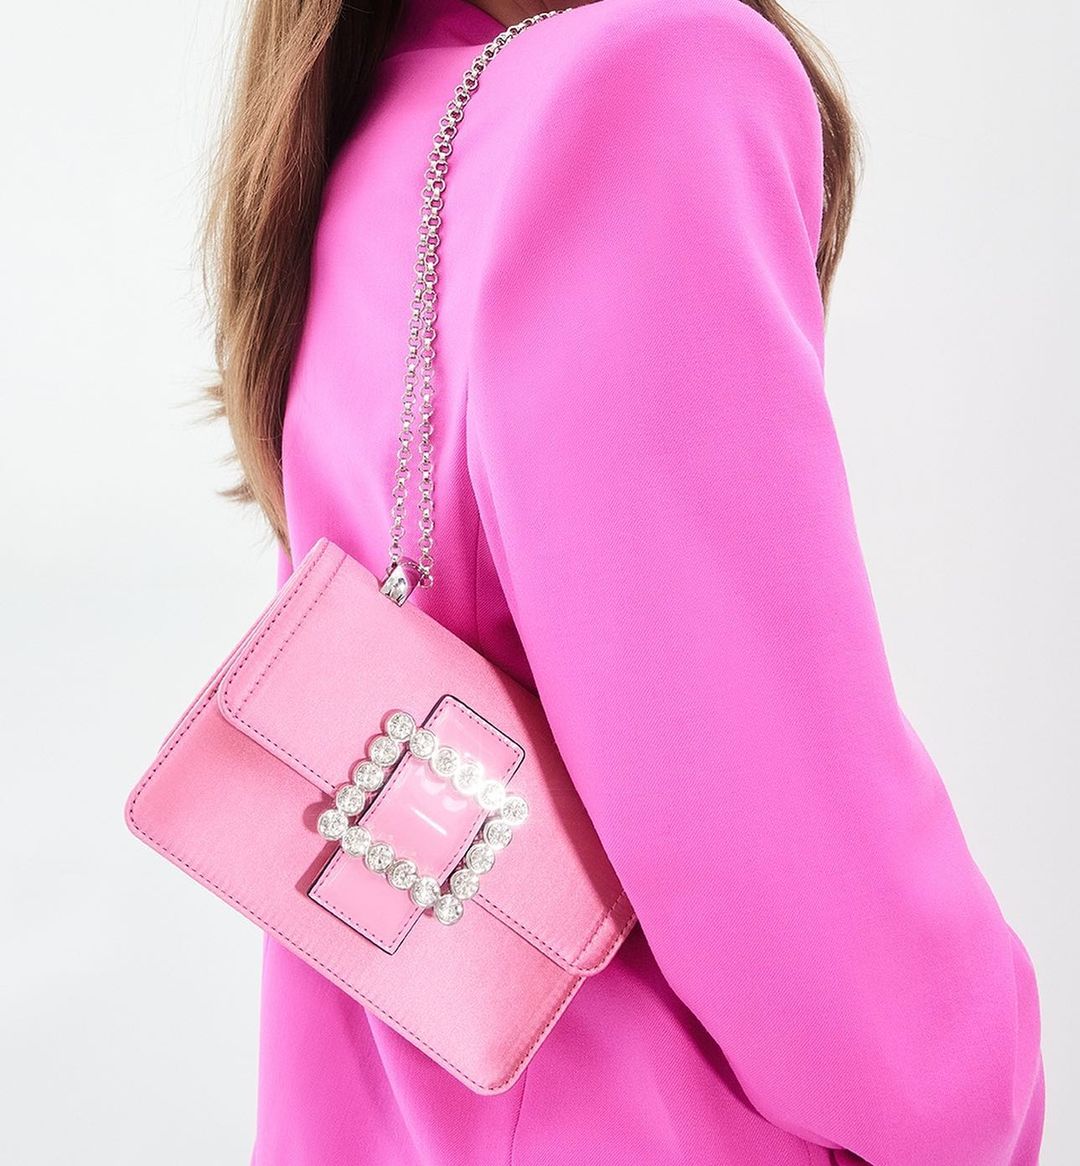 close-up image of a model in a pink blazer wearing a pink Aldo handbag with crystal embellishments on the buckle